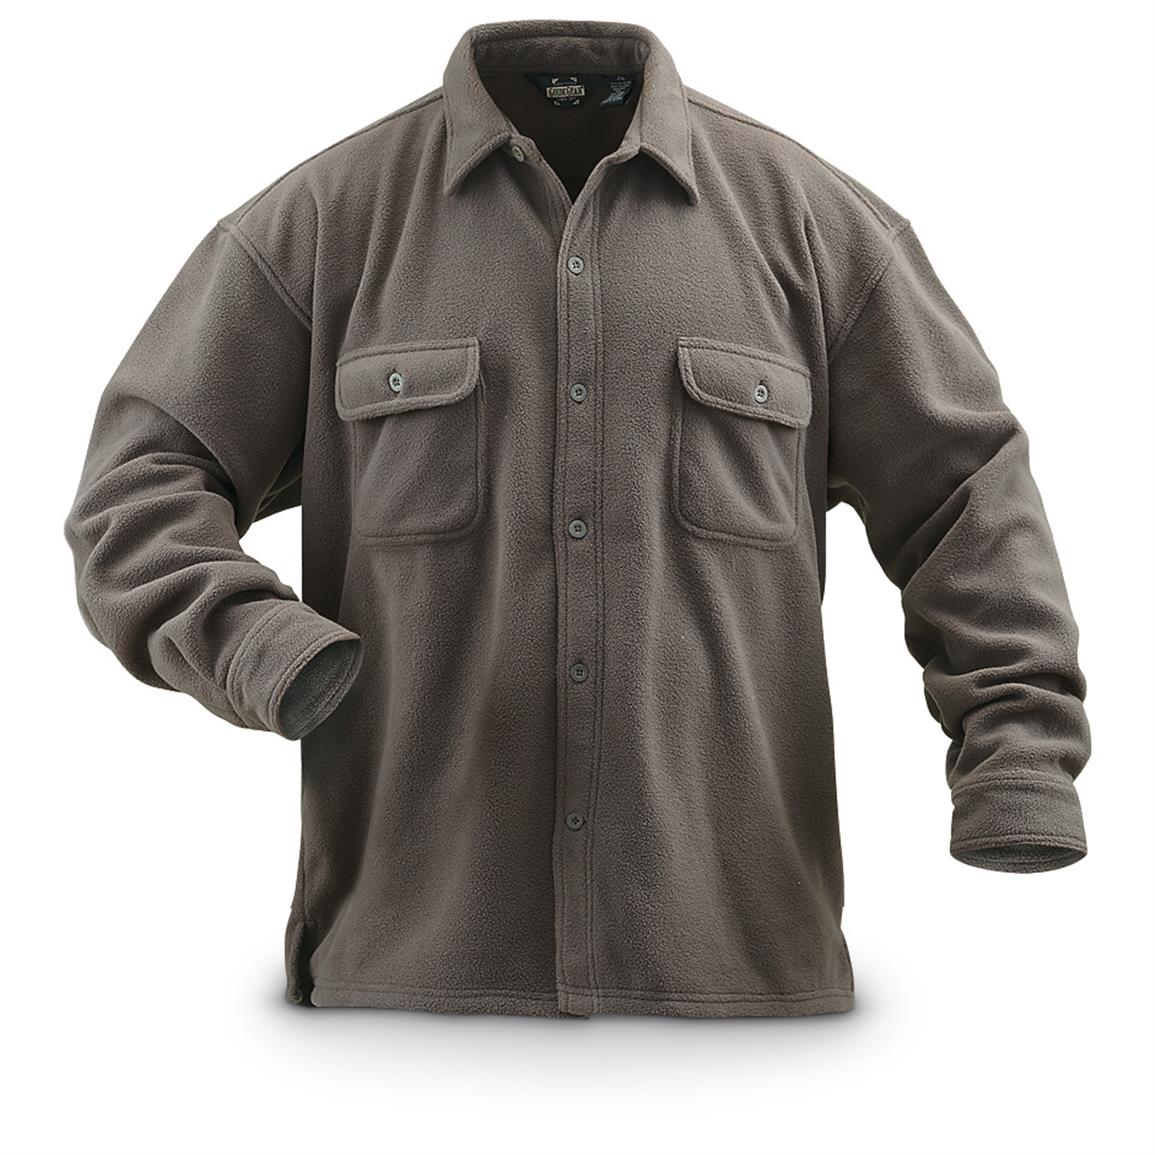 What is a CPO jacket?